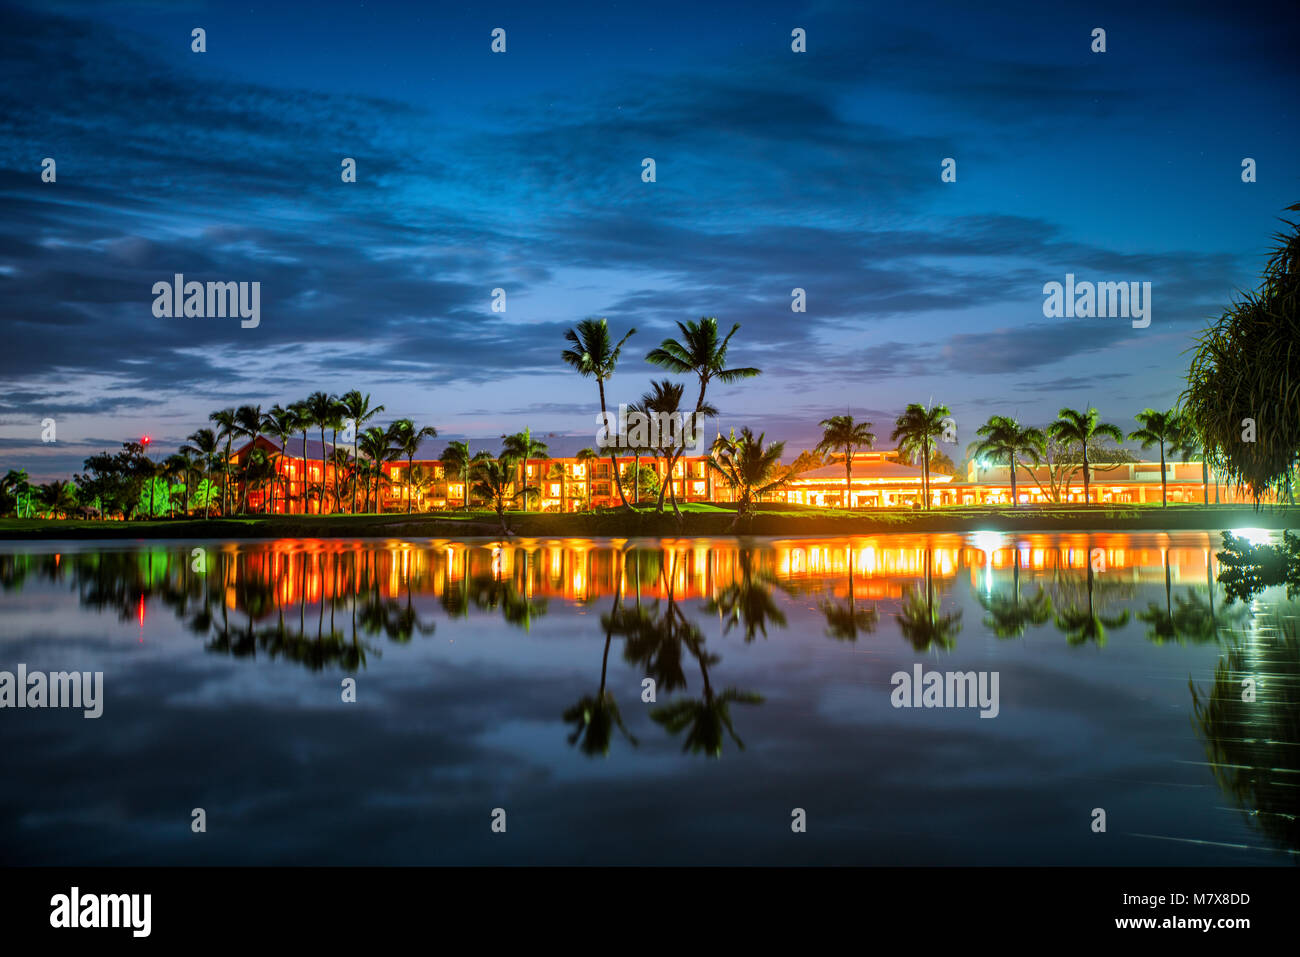 Tropical golf course at sunset, Dominican Republic, Punta Cana Stock Photo